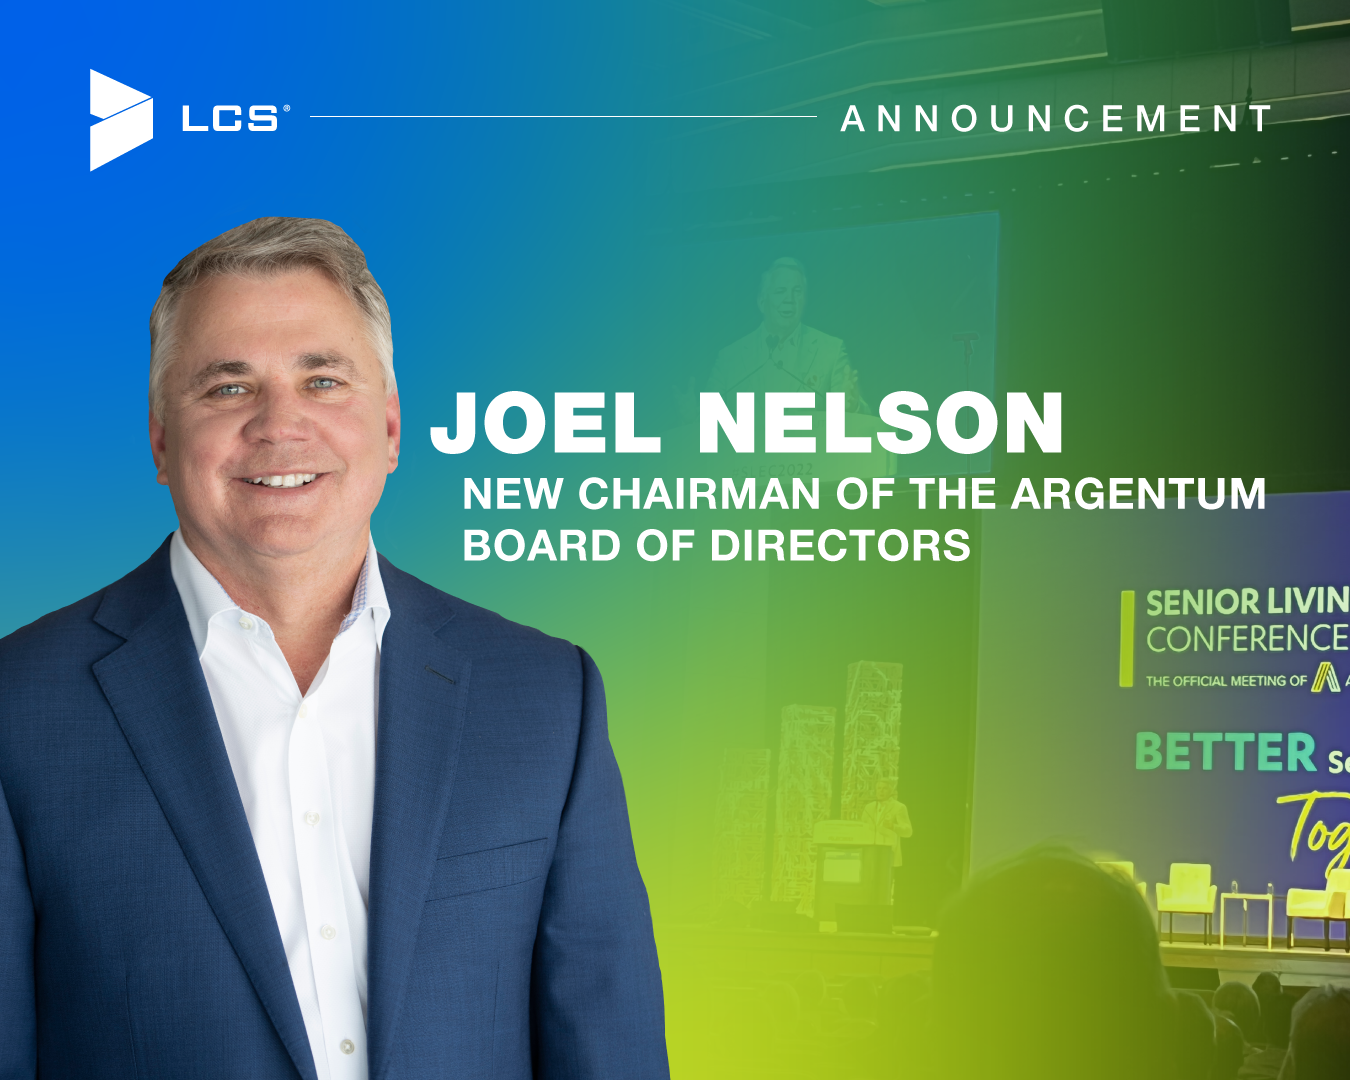 Graphic of Joel Nelson announcing him being the new chairman of the Argentum board of directors.